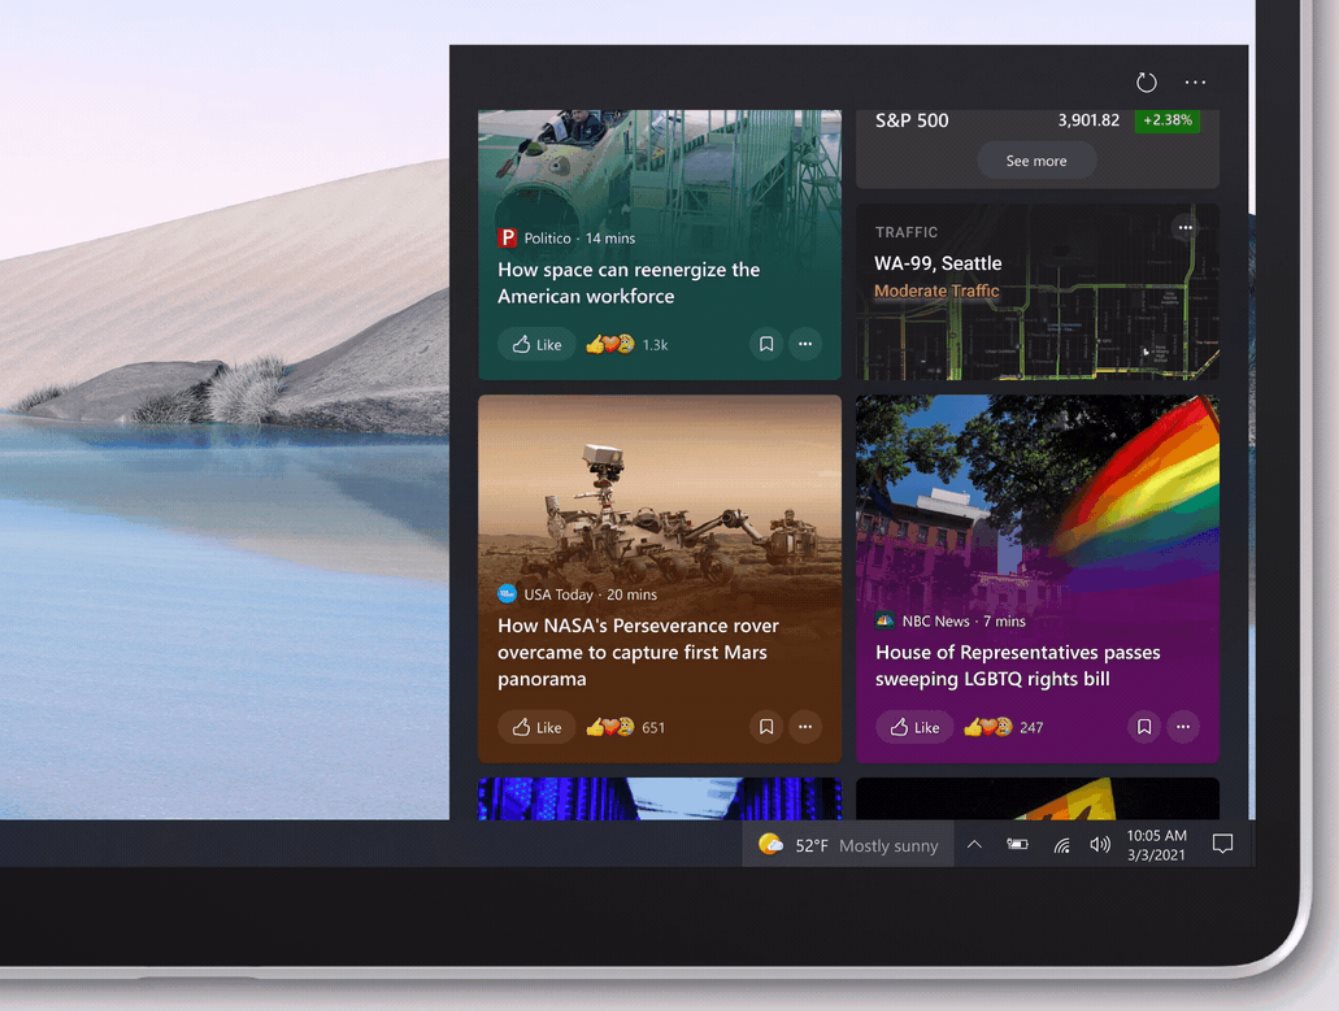 New windows 10 build gives the news and interests ui a super cool look 532335 2